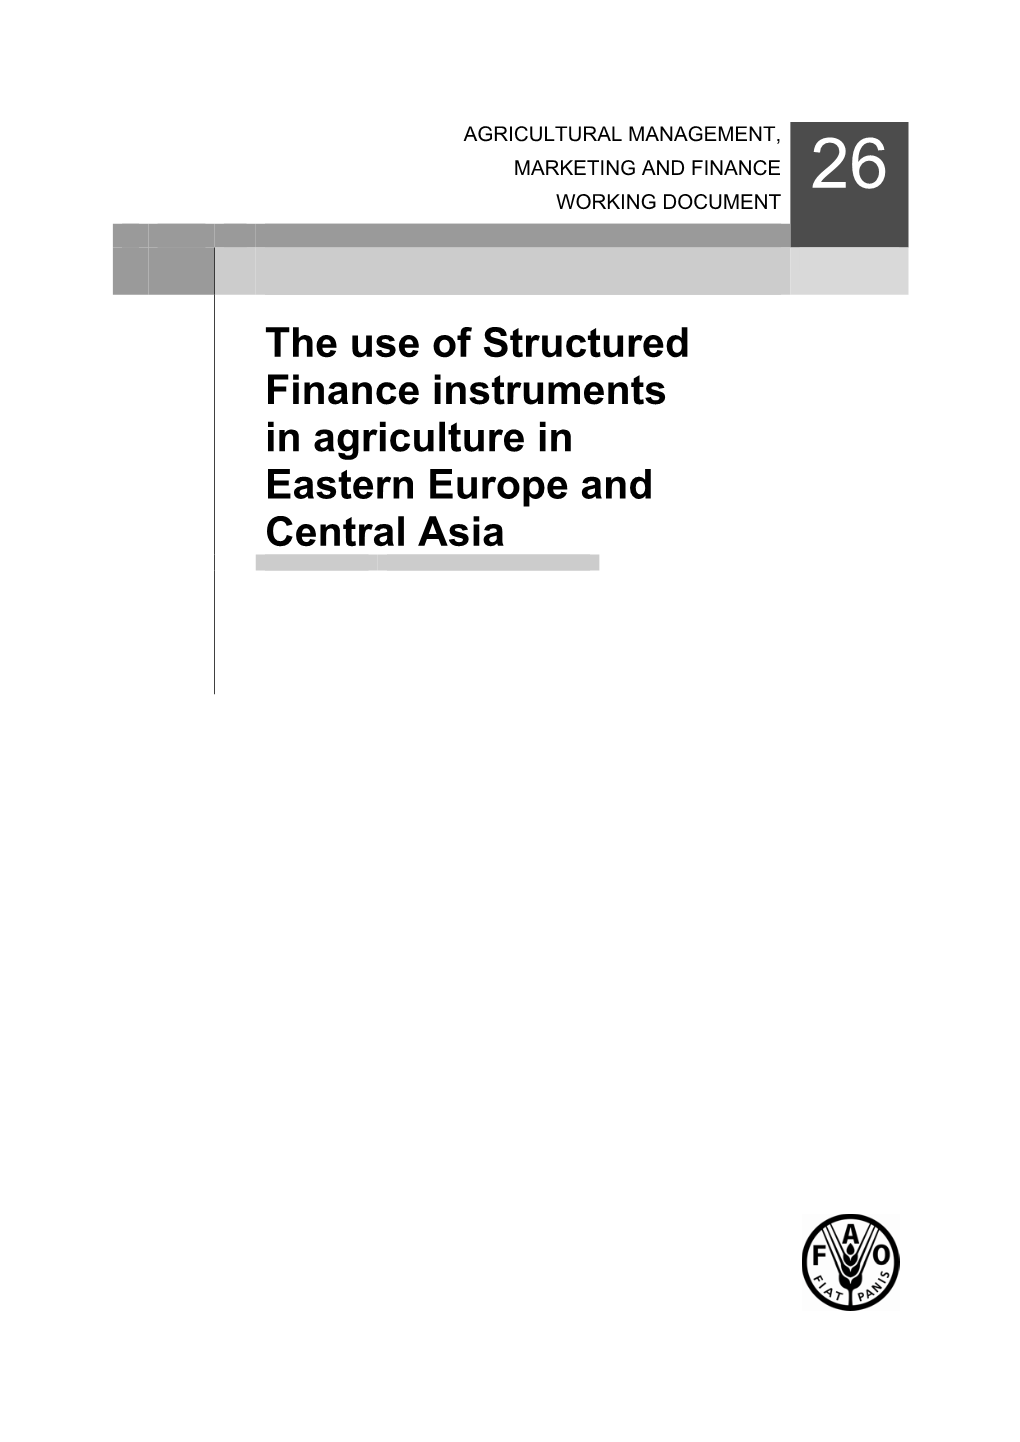 The Use of Structured Finance Instruments in Agriculture in Eastern Europe and Central Asia